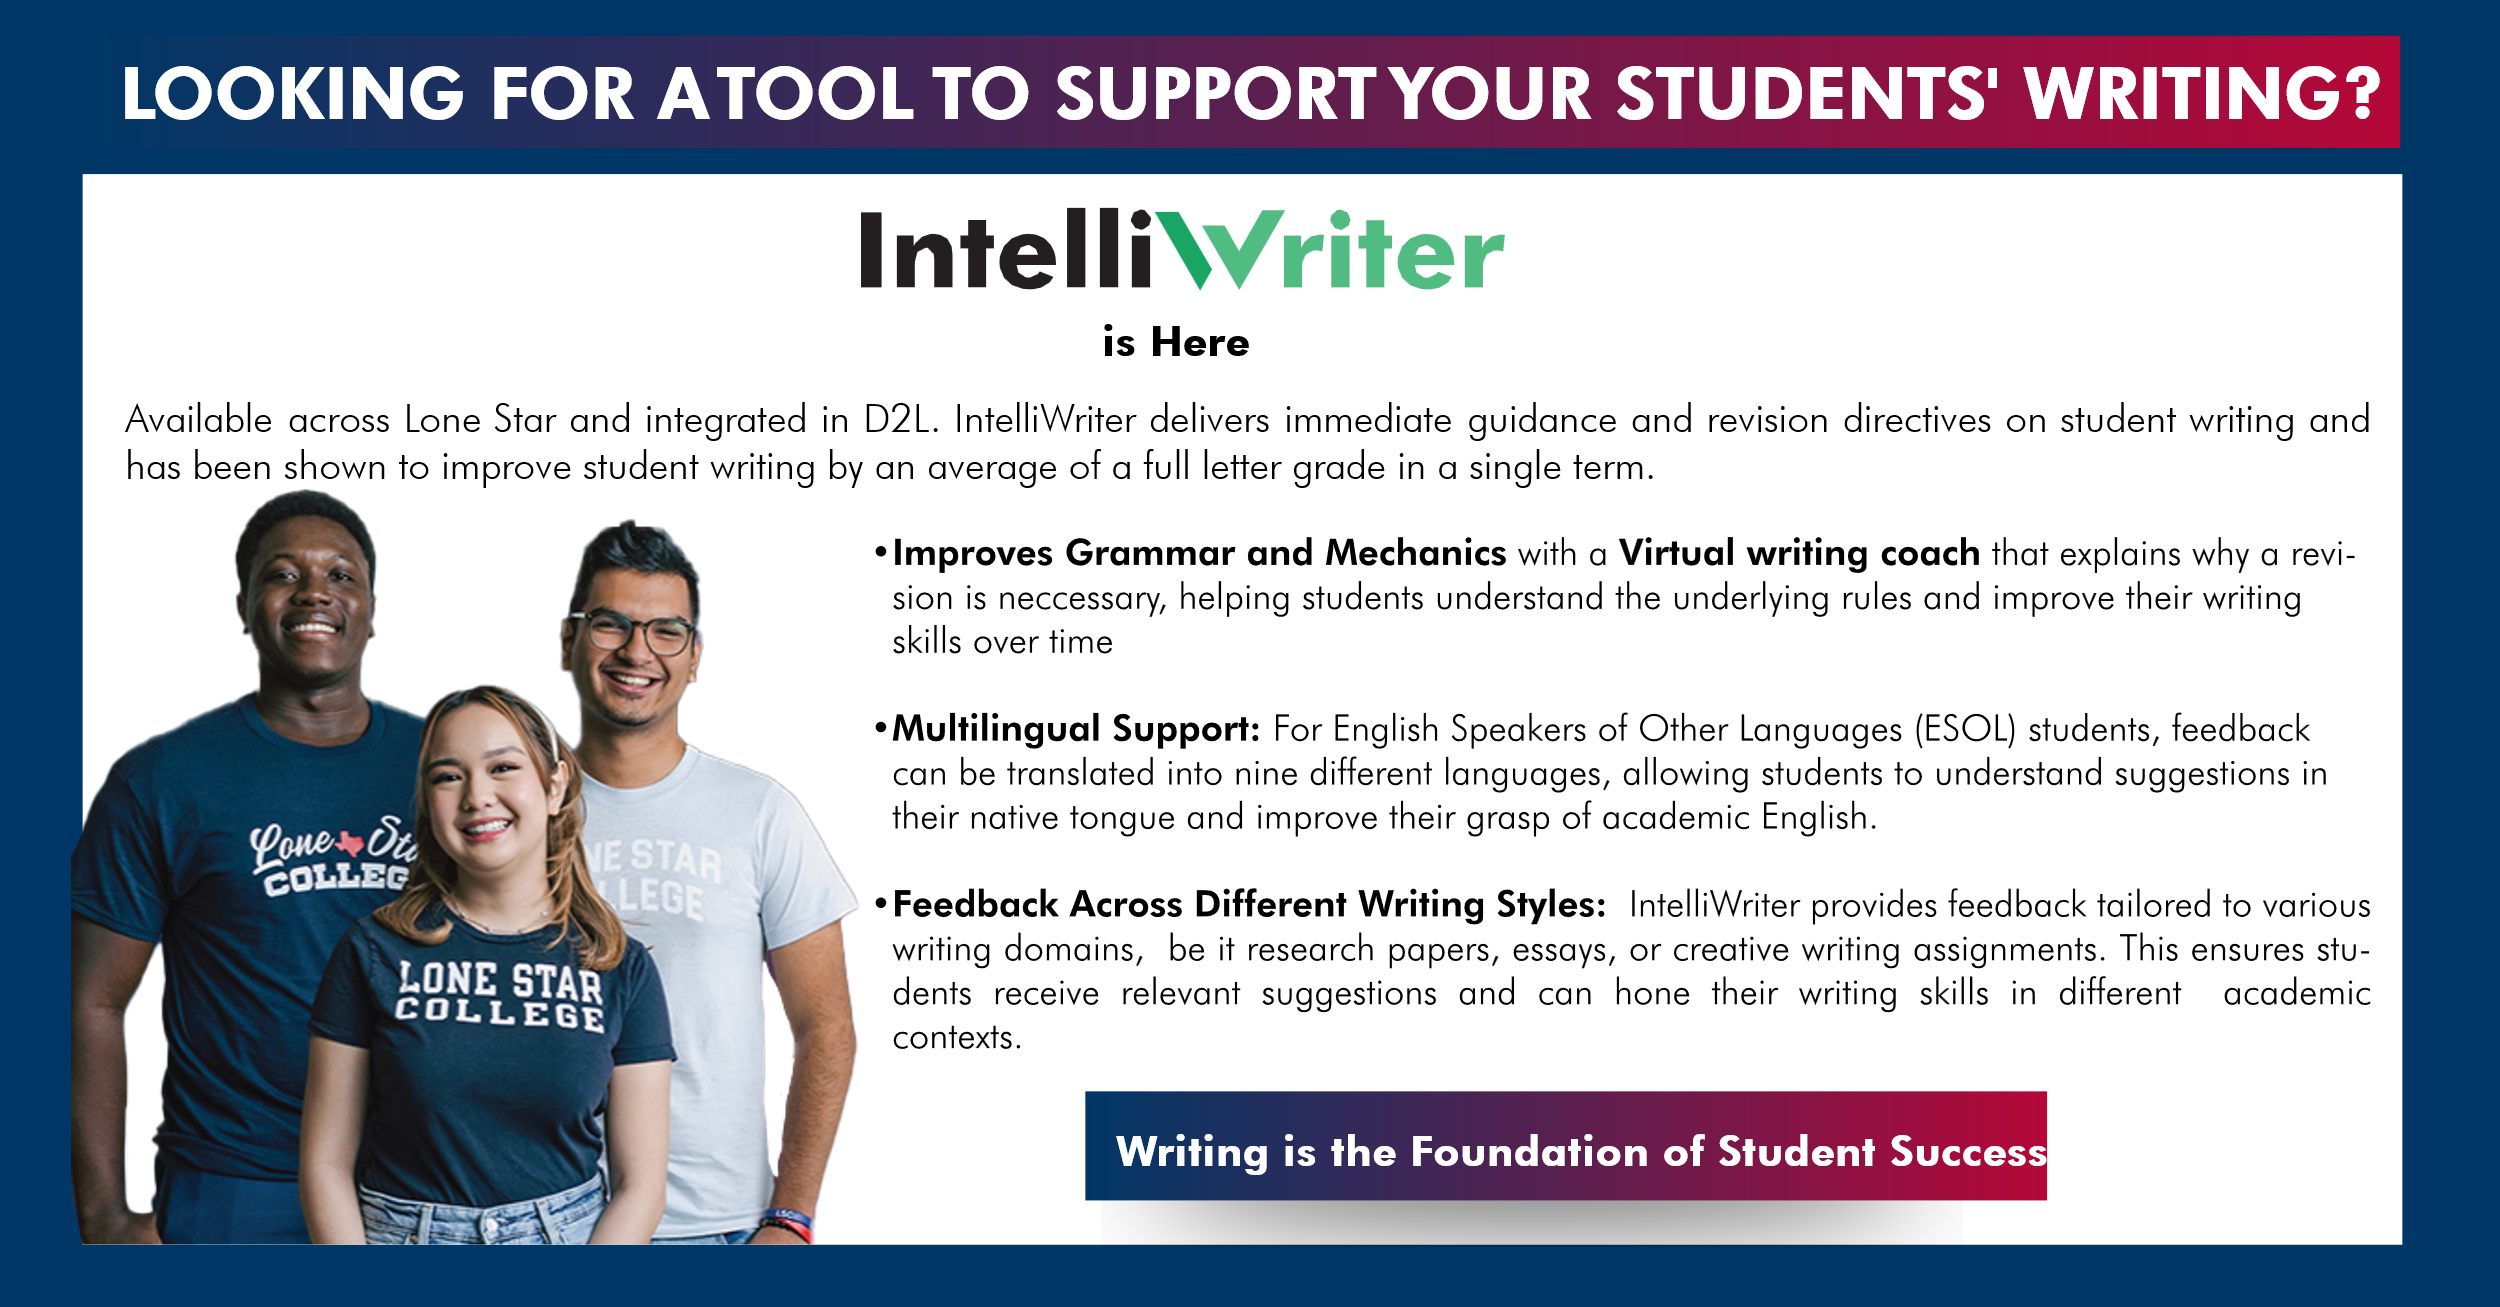 Learn how to incorporate IntelliWriter into your courses today!  Sign up for on demand one-on-one training or arrange a group training for your department!